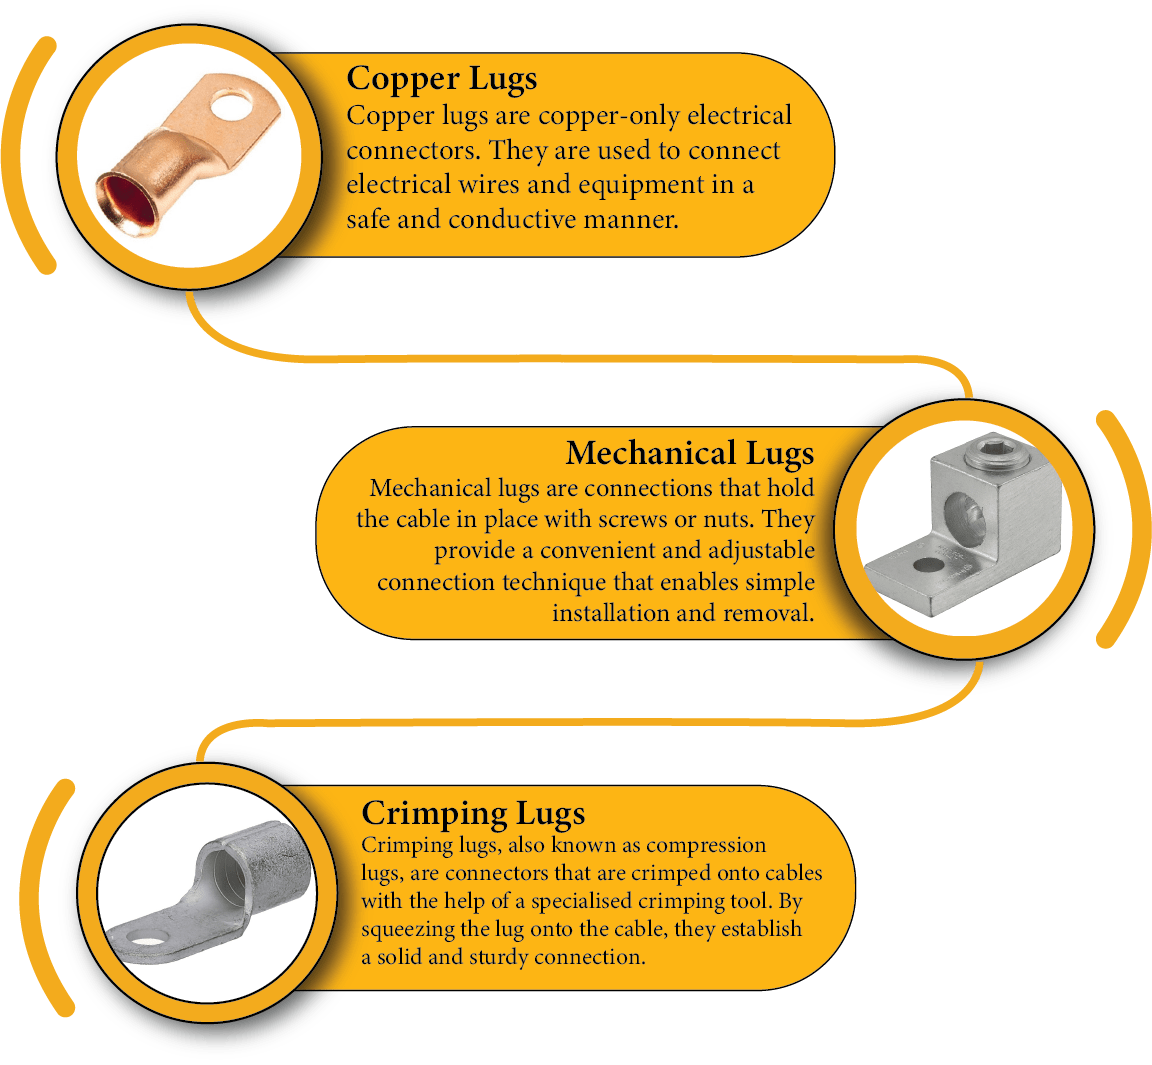 Types of copper lugs